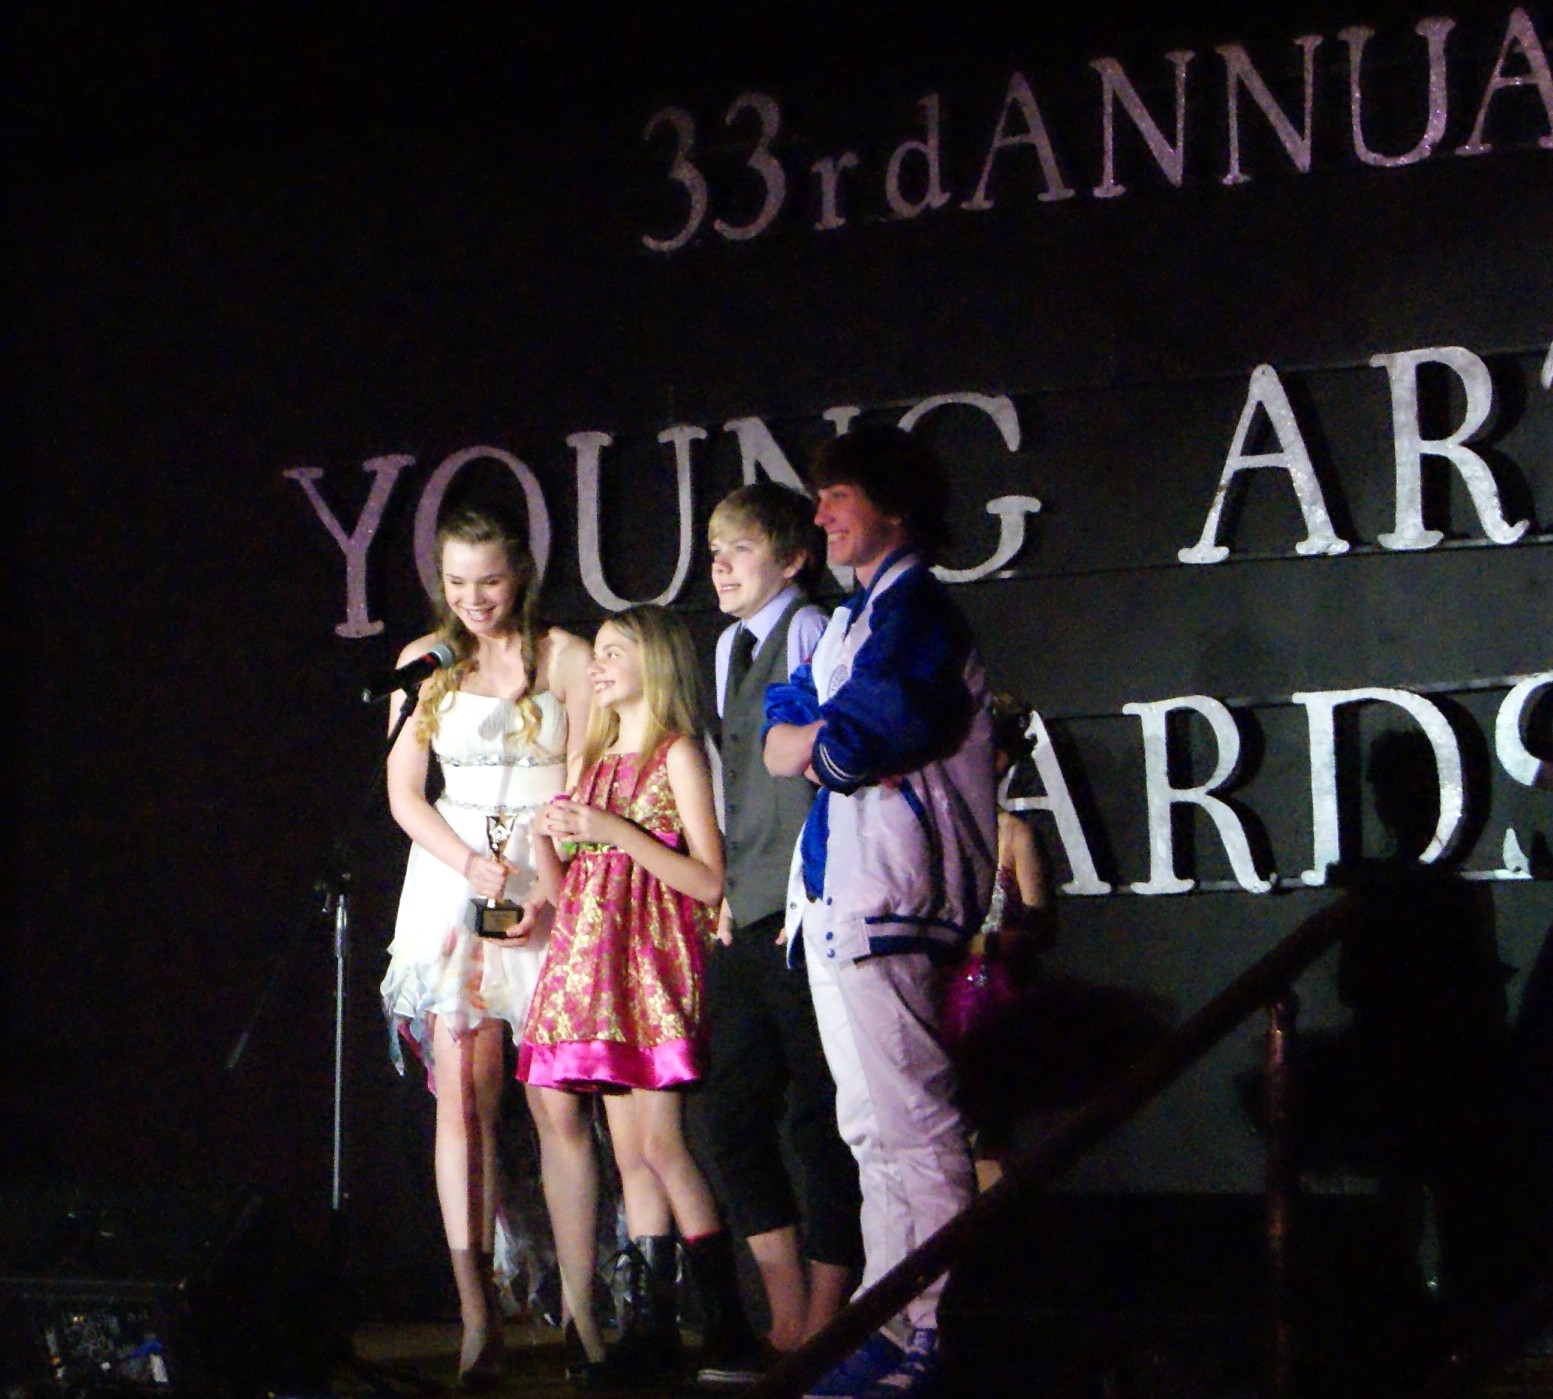 Won Best Outstanding ensemble cast for a TV series for DEBRA!At 33rd Young Artists Awards